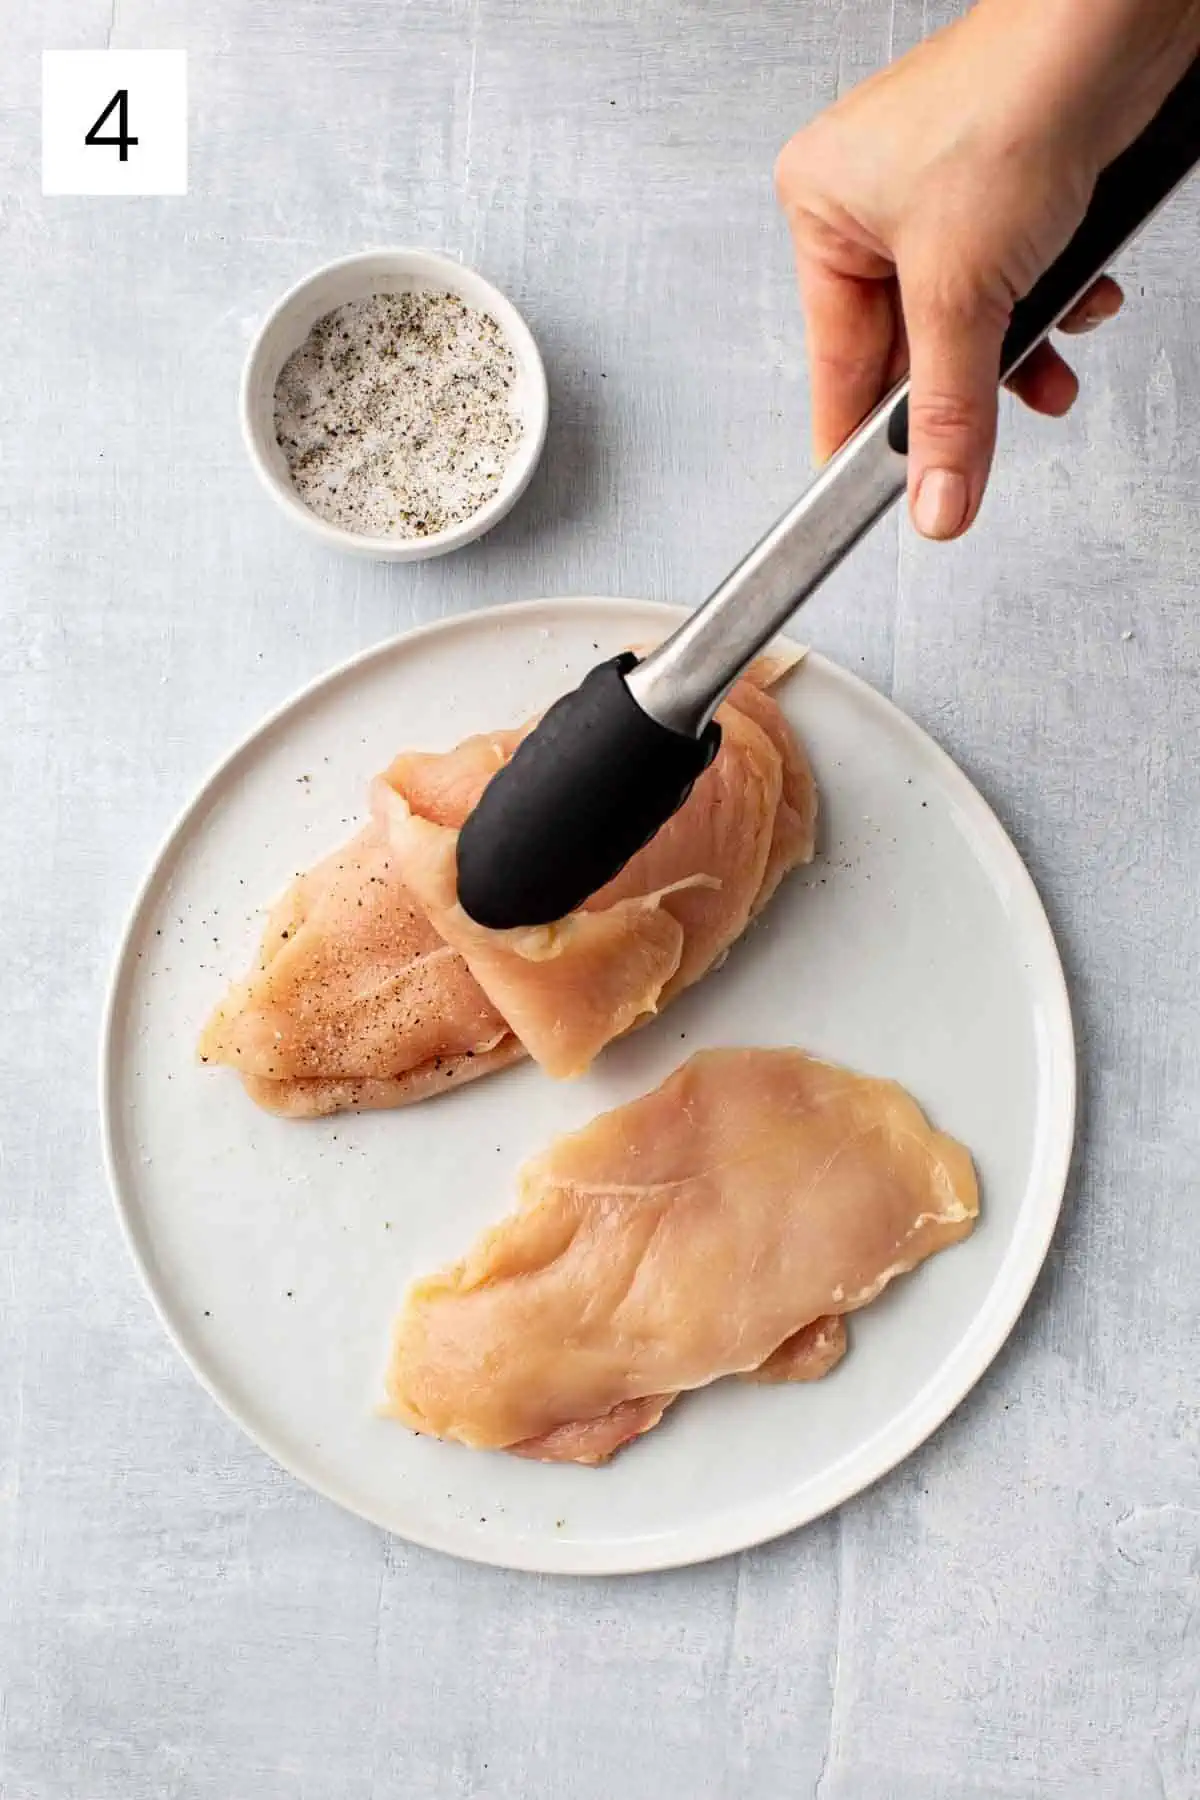 Tongs placing a raw chicken breast on to a pile of other raw chicken.